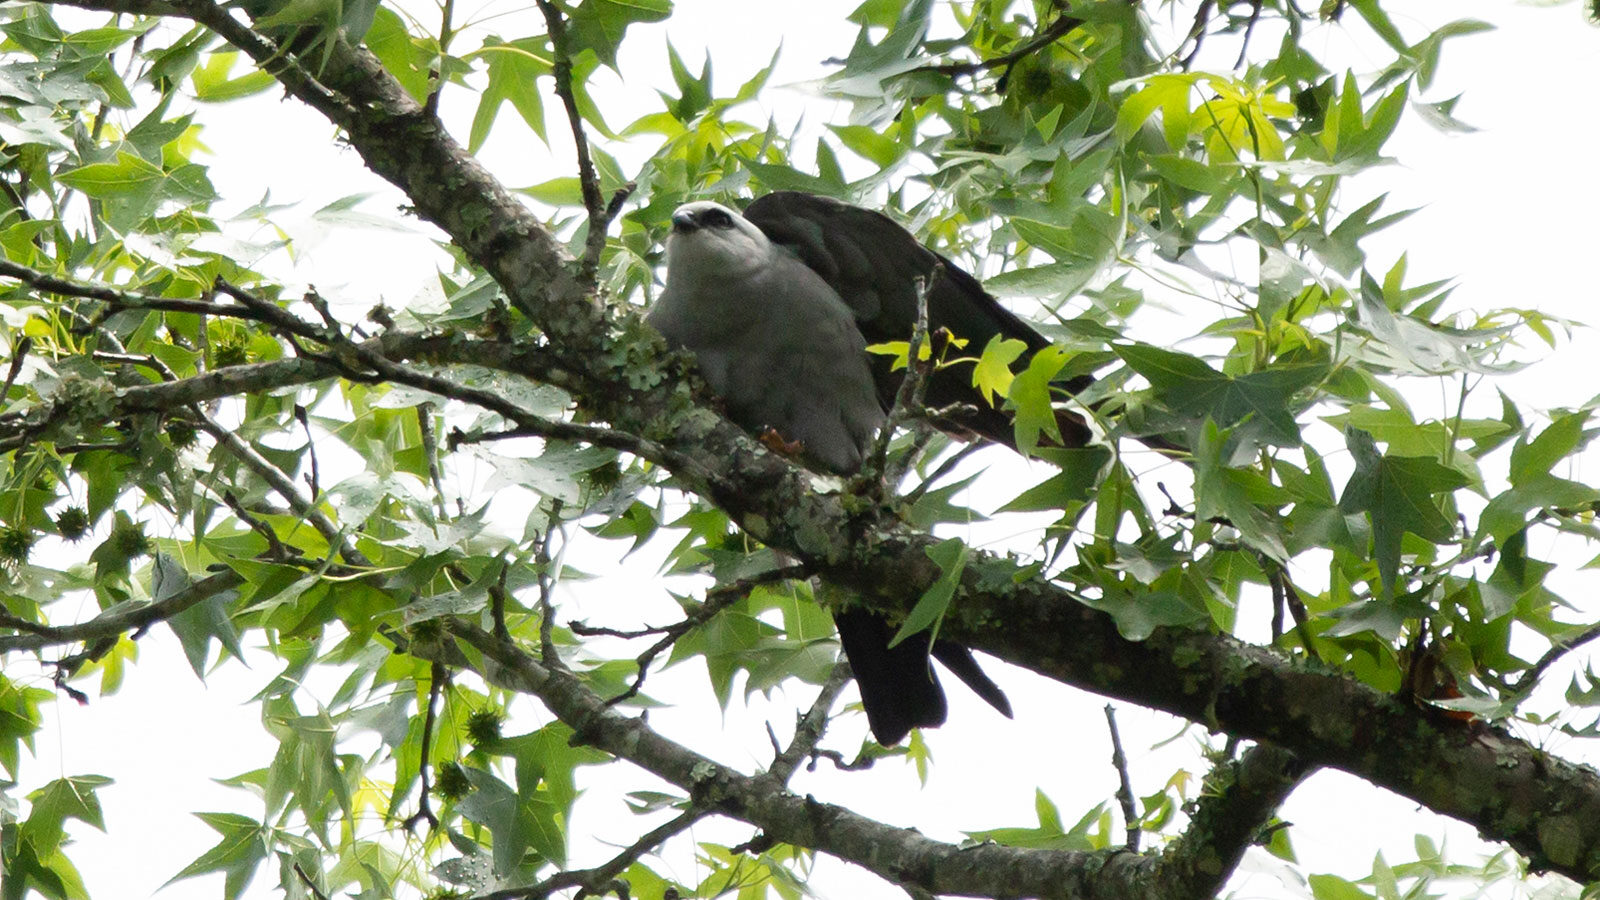 Mississippi kite looking out from its perch from a tree branch